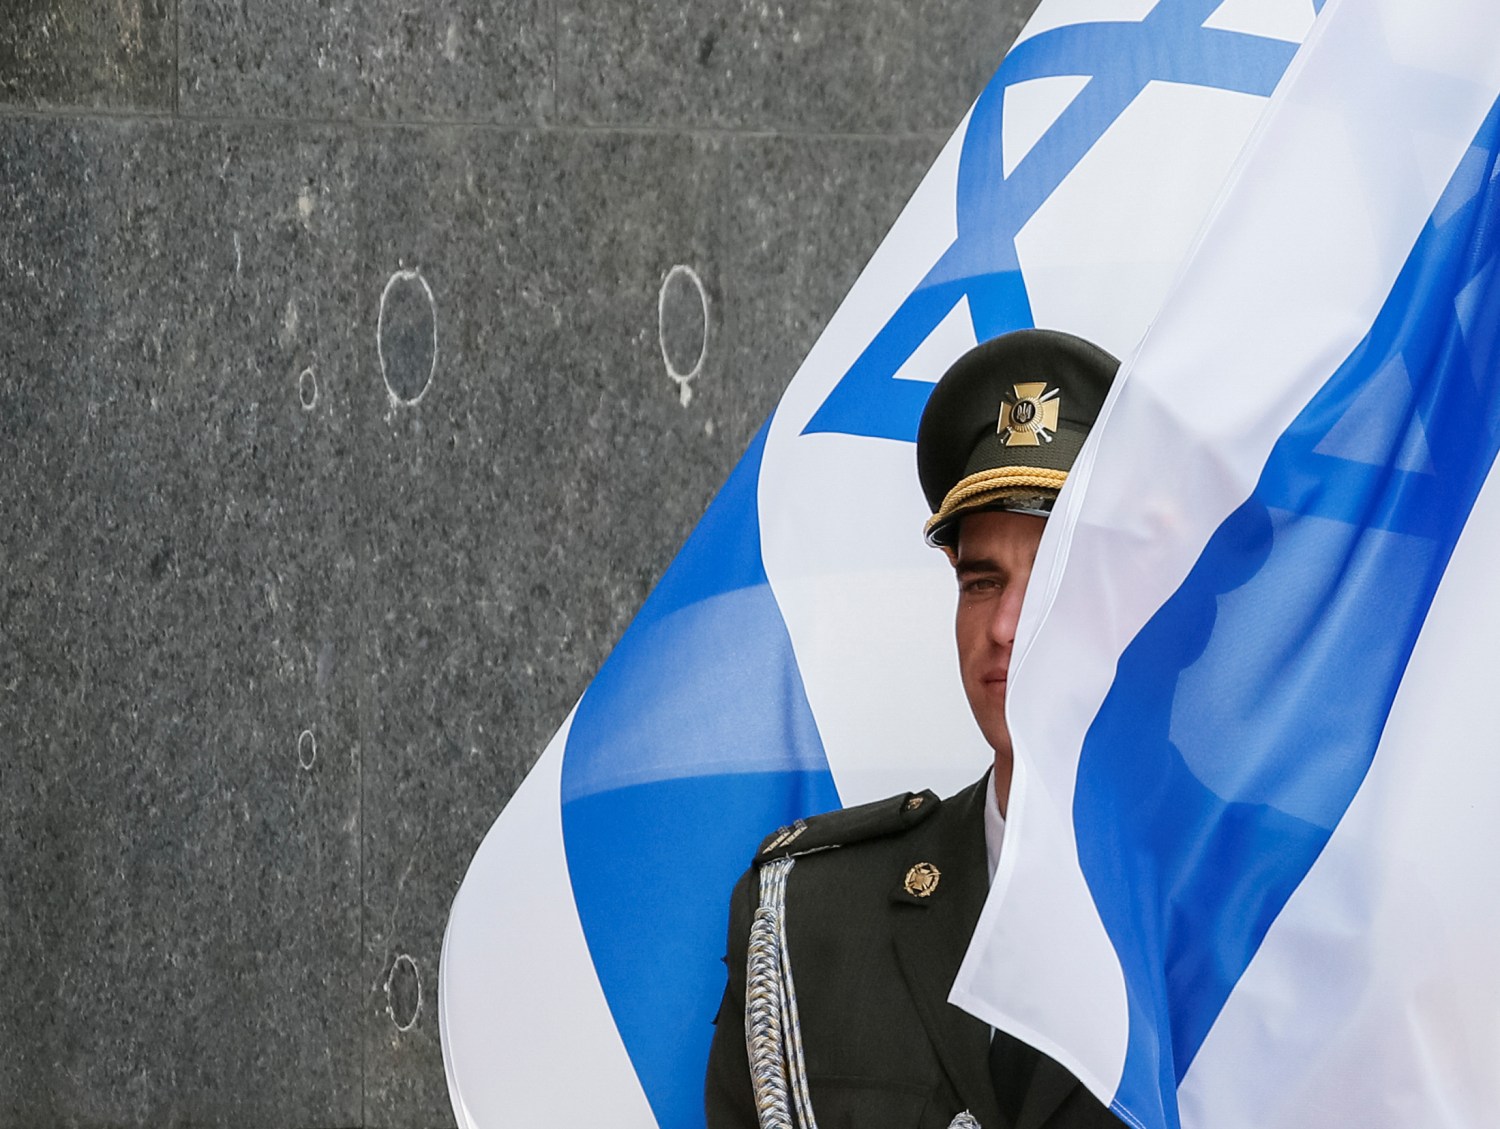 Israeli national flag covers a soldier from Ukraine's honour guards during a welcoming ceremony for Israeli President Reuven Rivlin in Kiev, Ukraine, September 27, 2016.  REUTERS/Gleb Garanich - D1BEUDSPOQAA